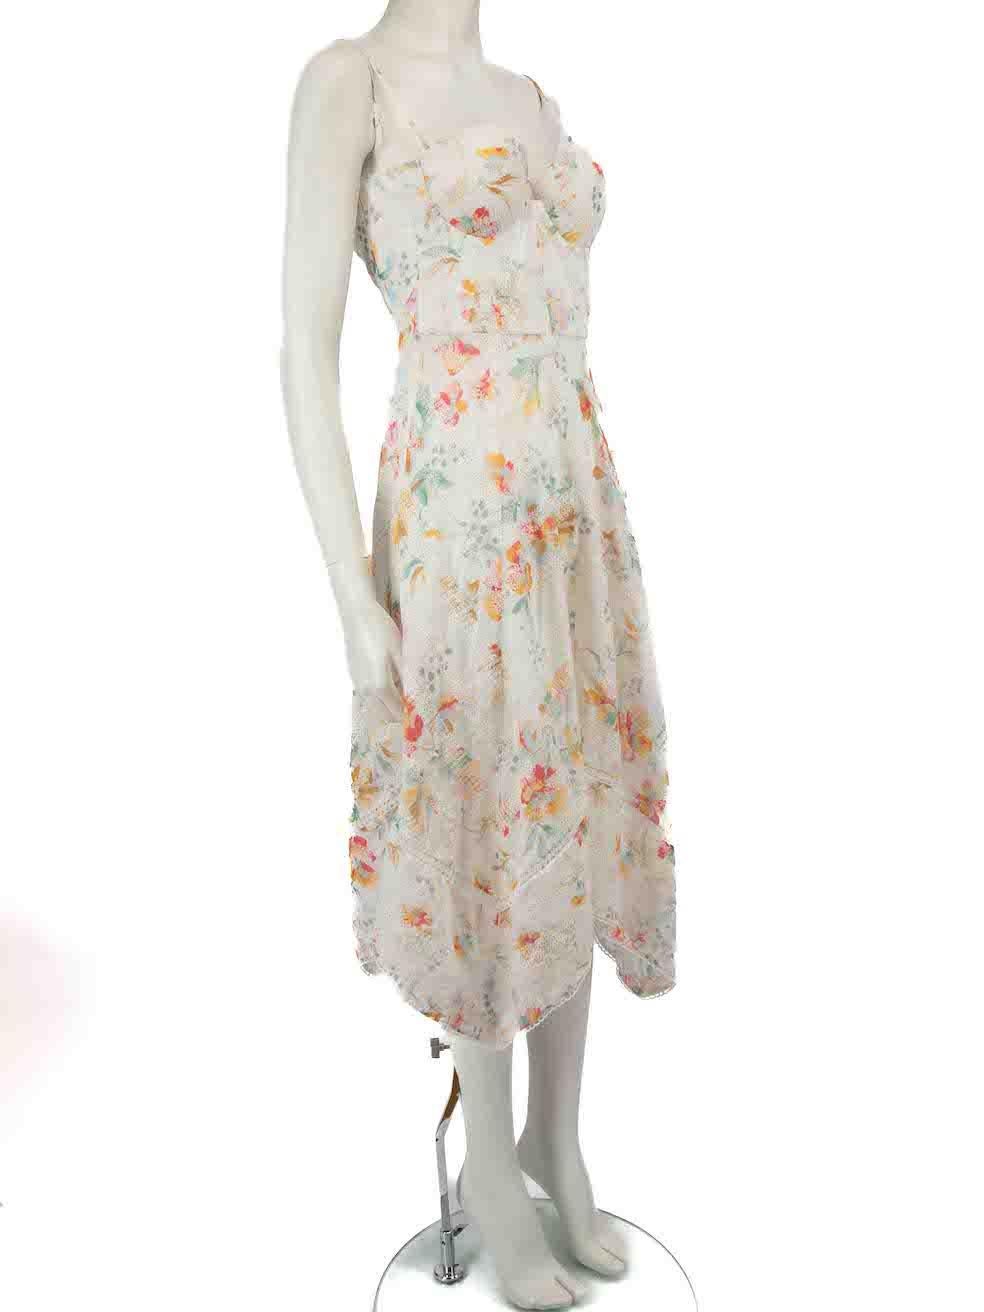 CONDITION is Very good. Minimal wear to dress is evident. Minimal stain mark to cup lining on this used Zimmermann designer resale item.
 
 
 
 Details
 
 
 White
 
 Cotton
 
 Midi dress
 
 Floral print pattern
 
 Sweetheart neckline
 
 Embroidered